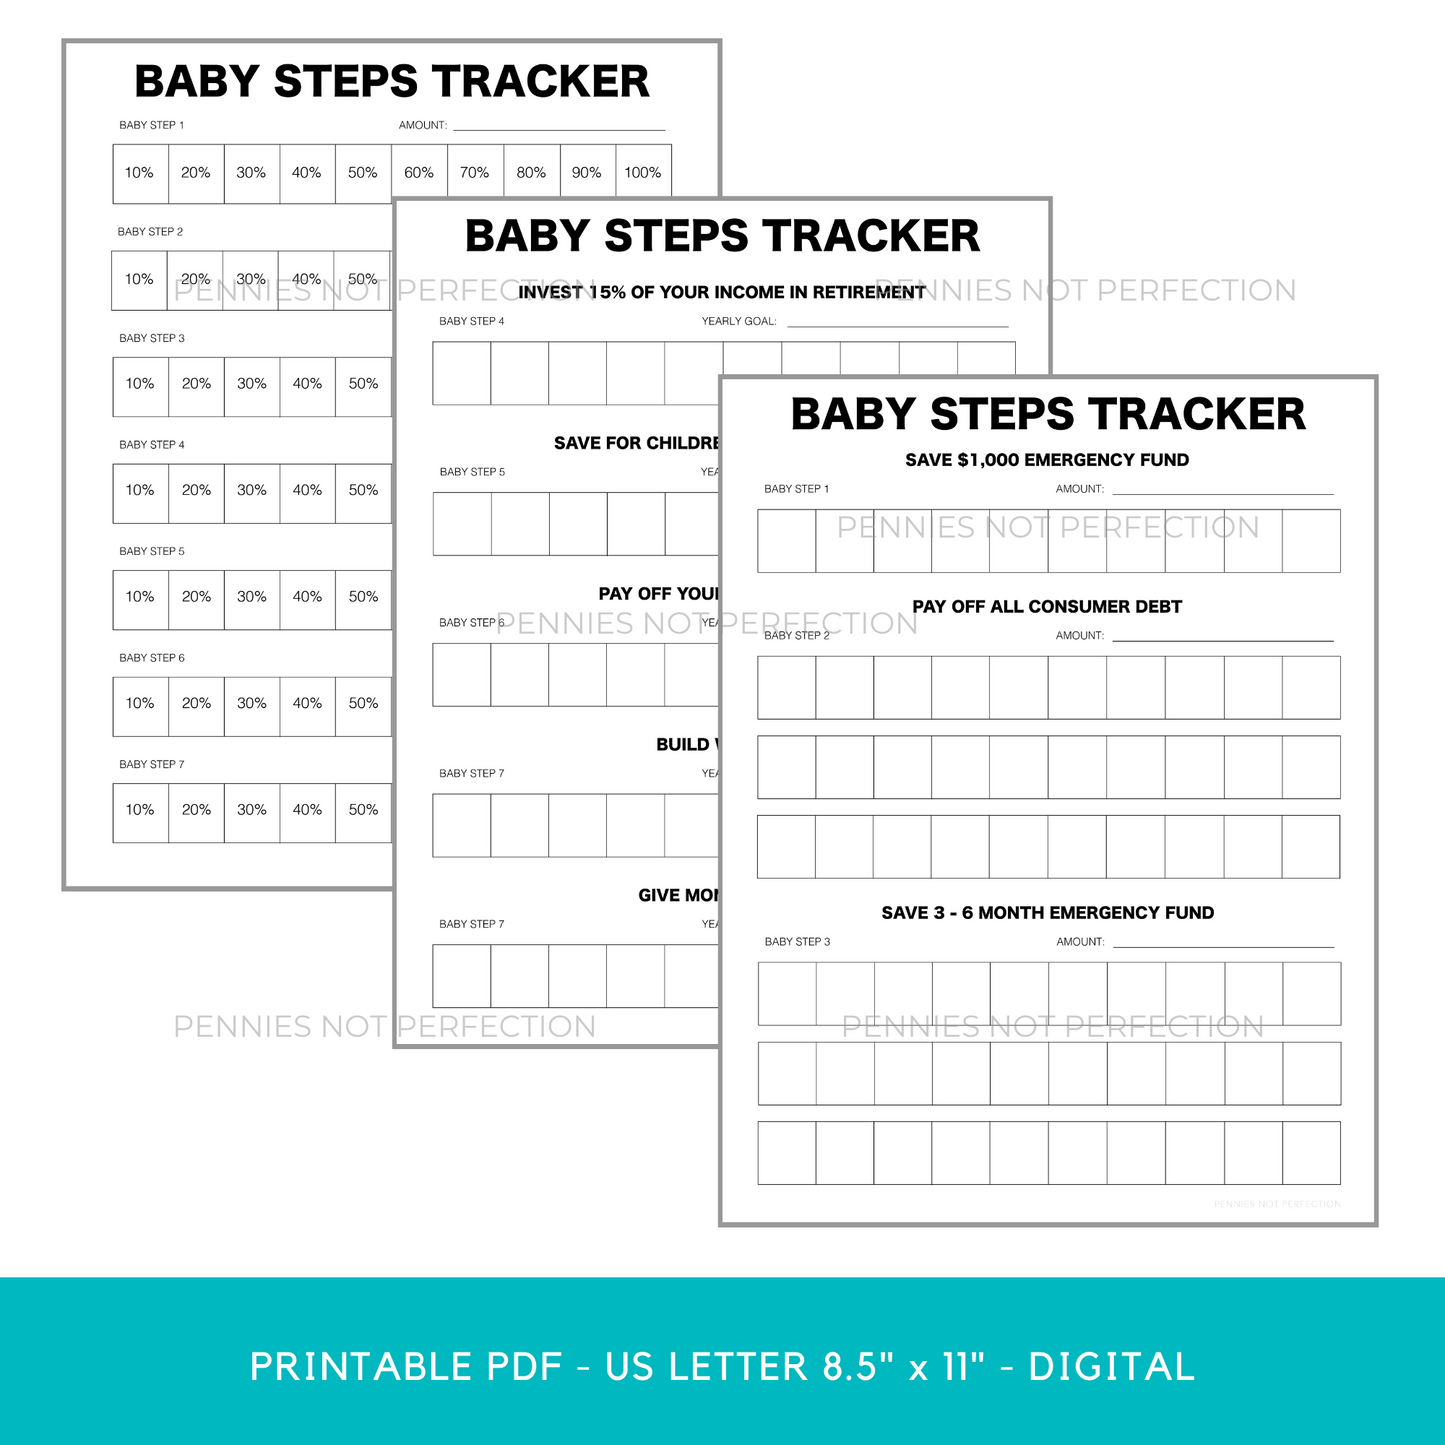 7 Baby Steps Tracker To Pay Off Debt & Build Wealth